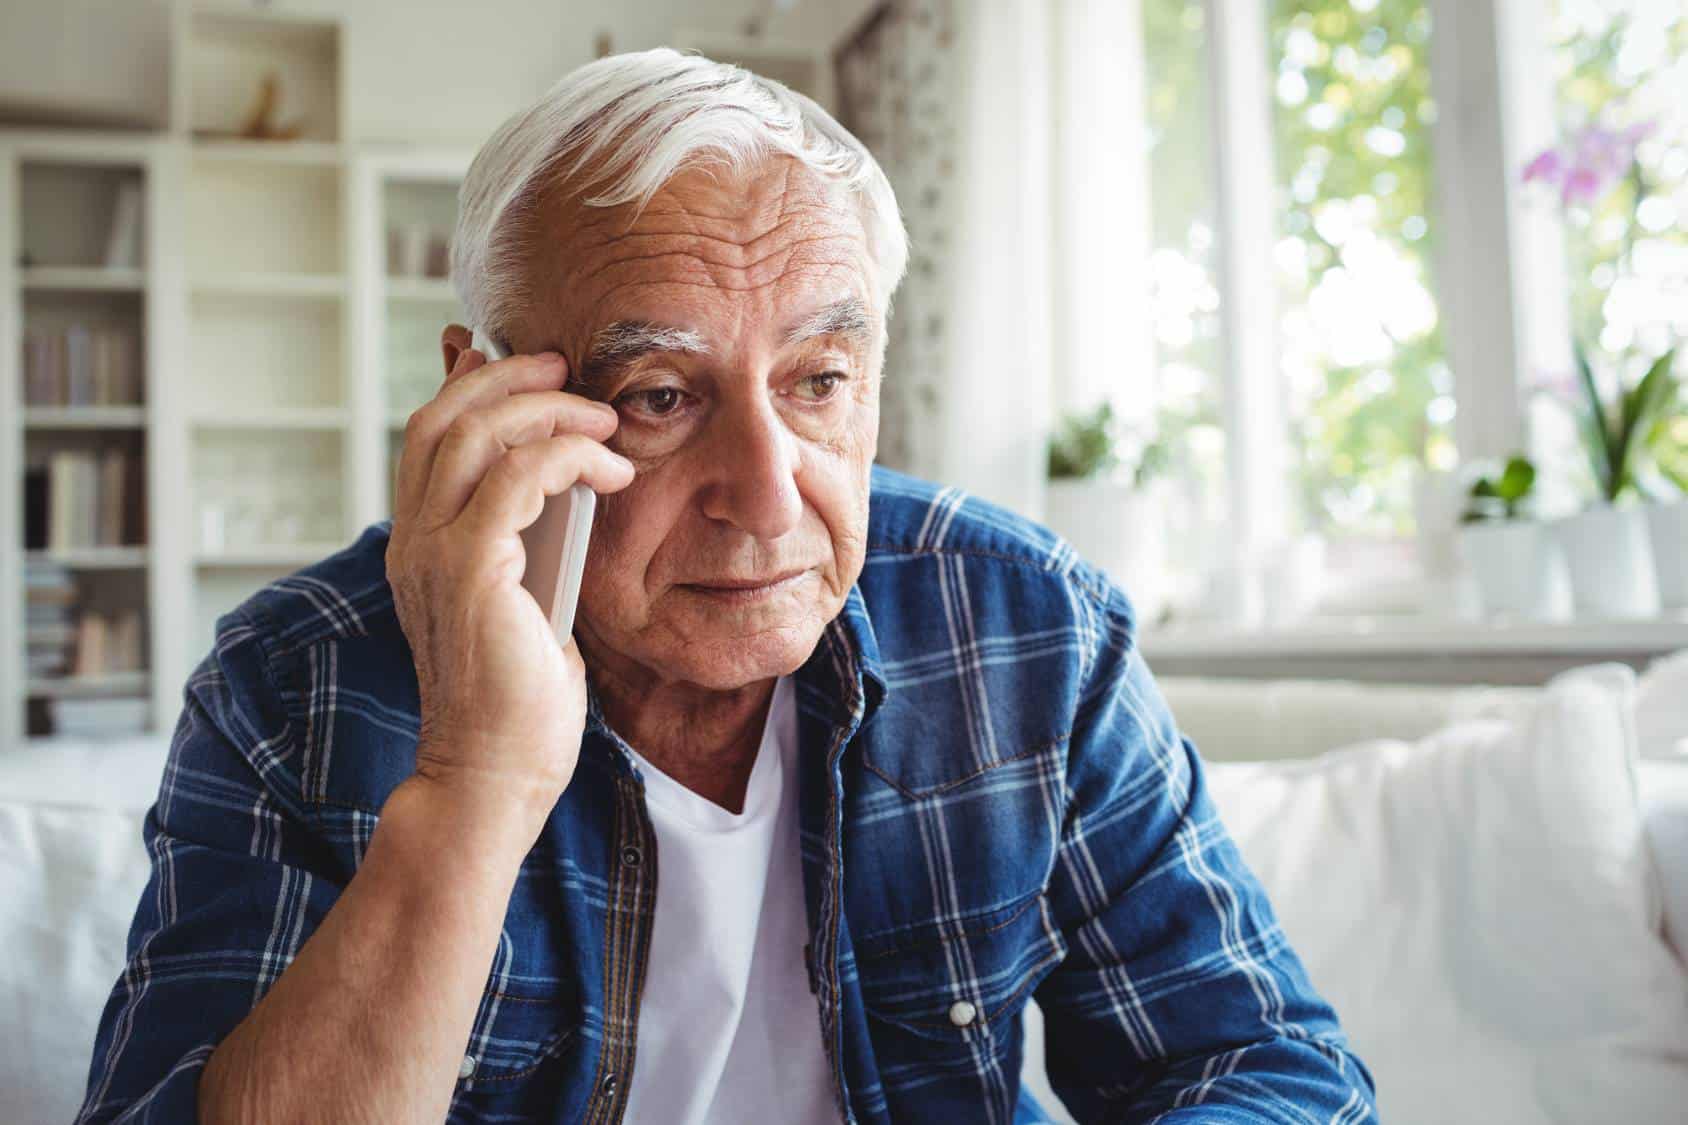 ABA Foundation - Safe Banking for Seniors: How Scammers Target Seniors